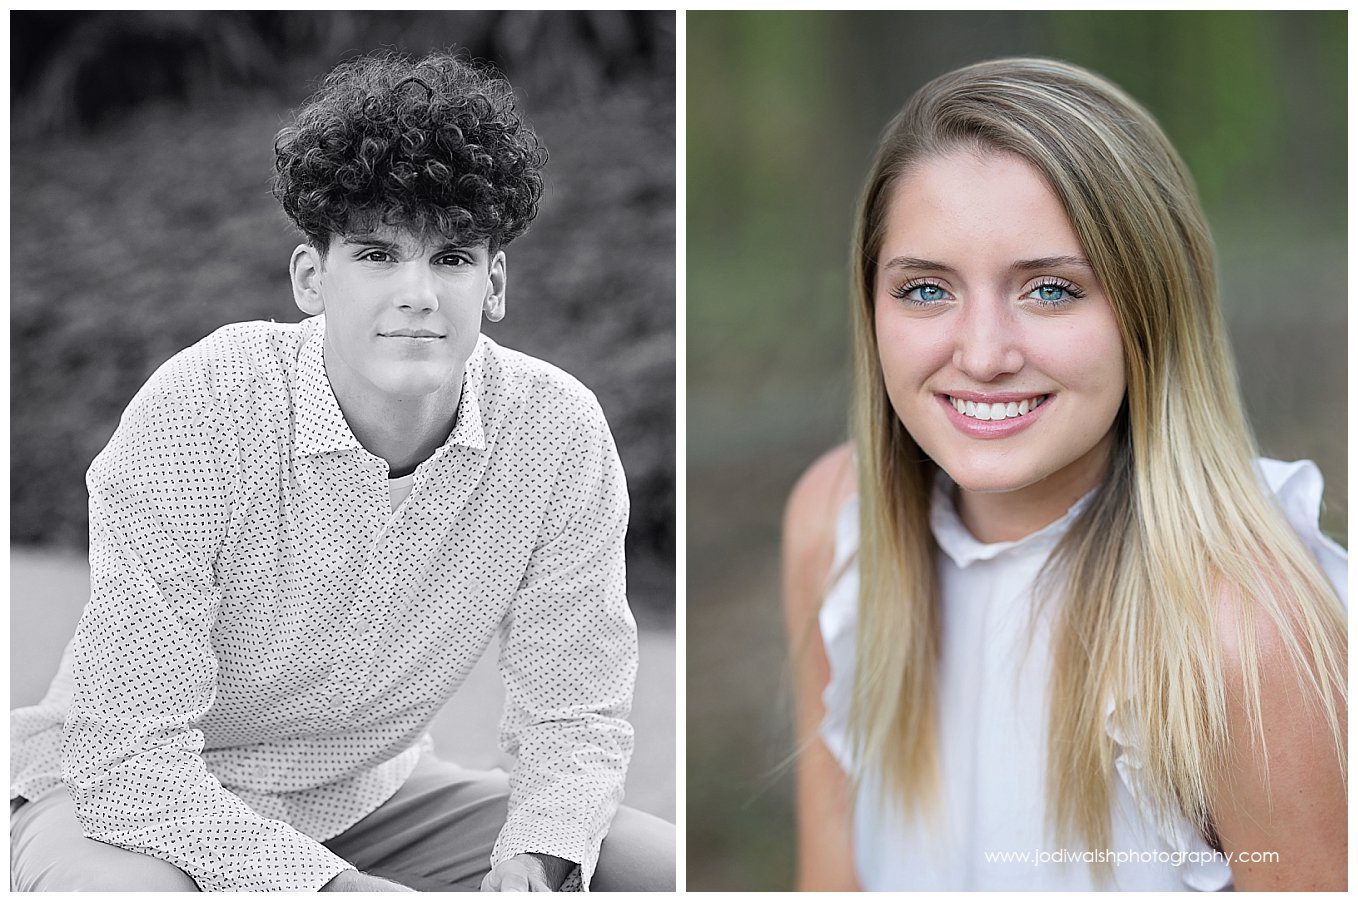 headshot images of seniors.  the first image is a black and white image of a senior guy.  he's wearing a button down shirt and is leaning forward with his elbows on his knees.  the second image is of a senior girl.  she's wearing a white top and has long blonde hair and bright blue eyes.